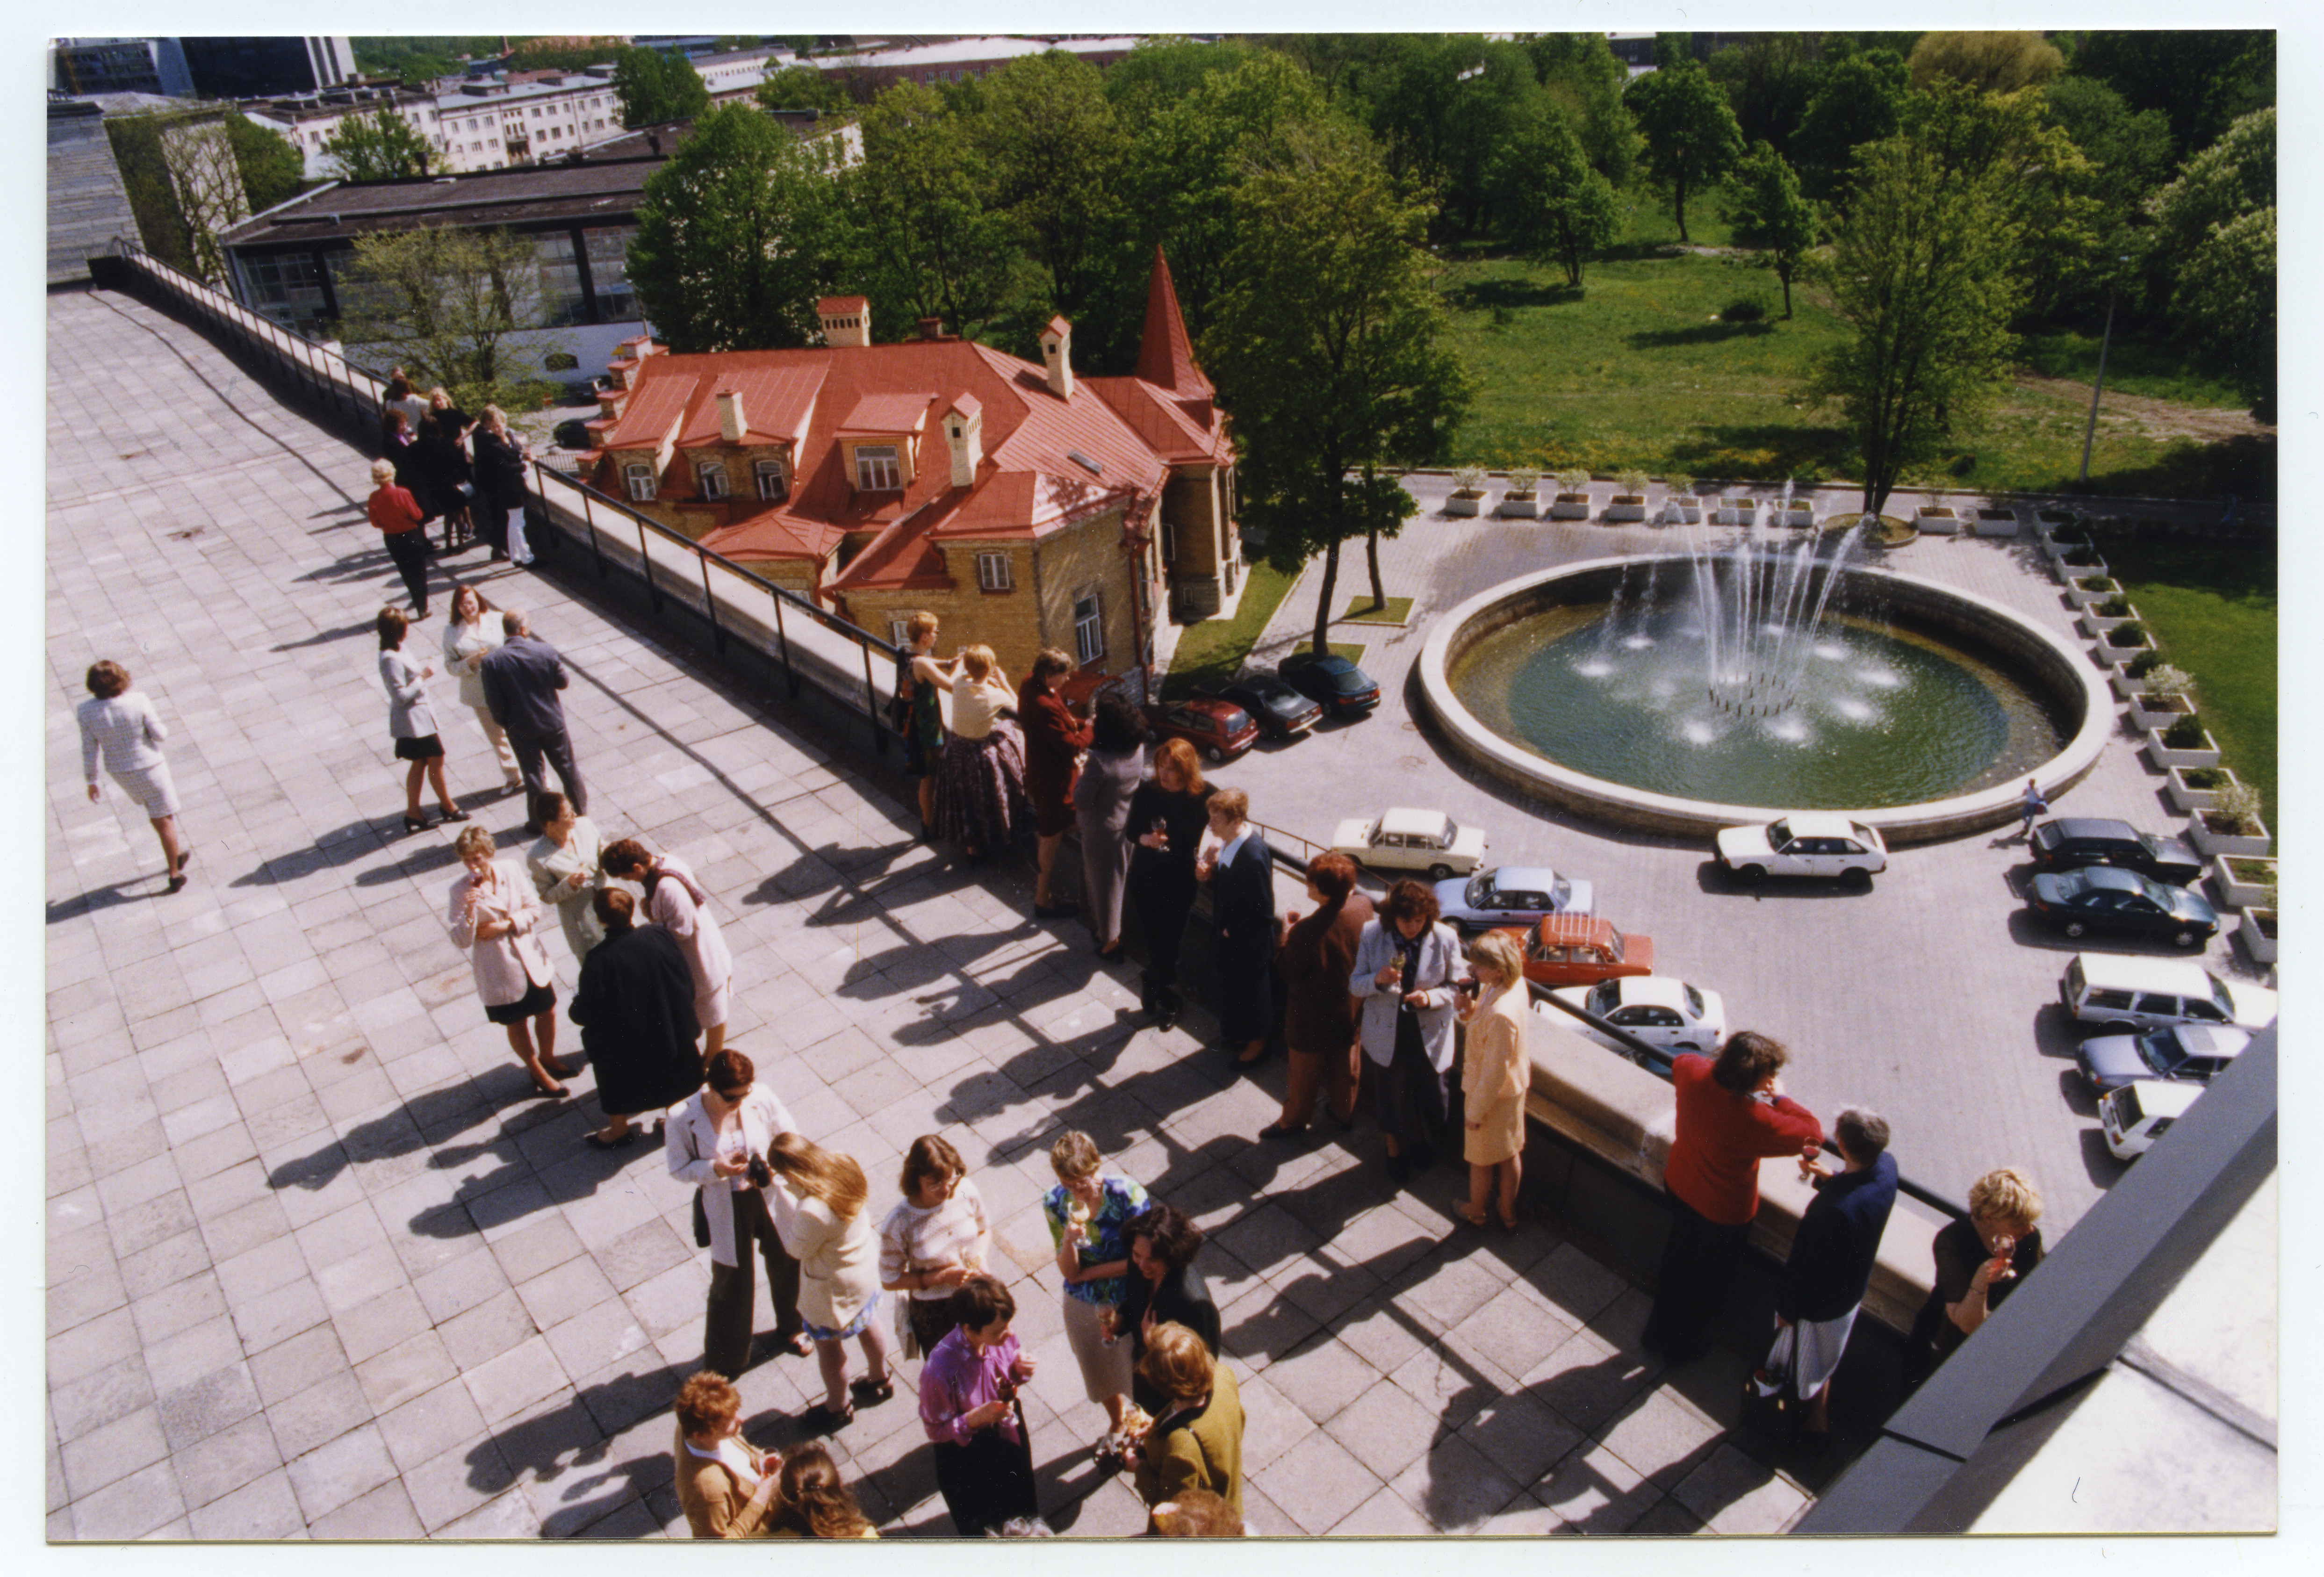 The Anniversary of the Arts Information Centre (ICC) (28.05.1999).